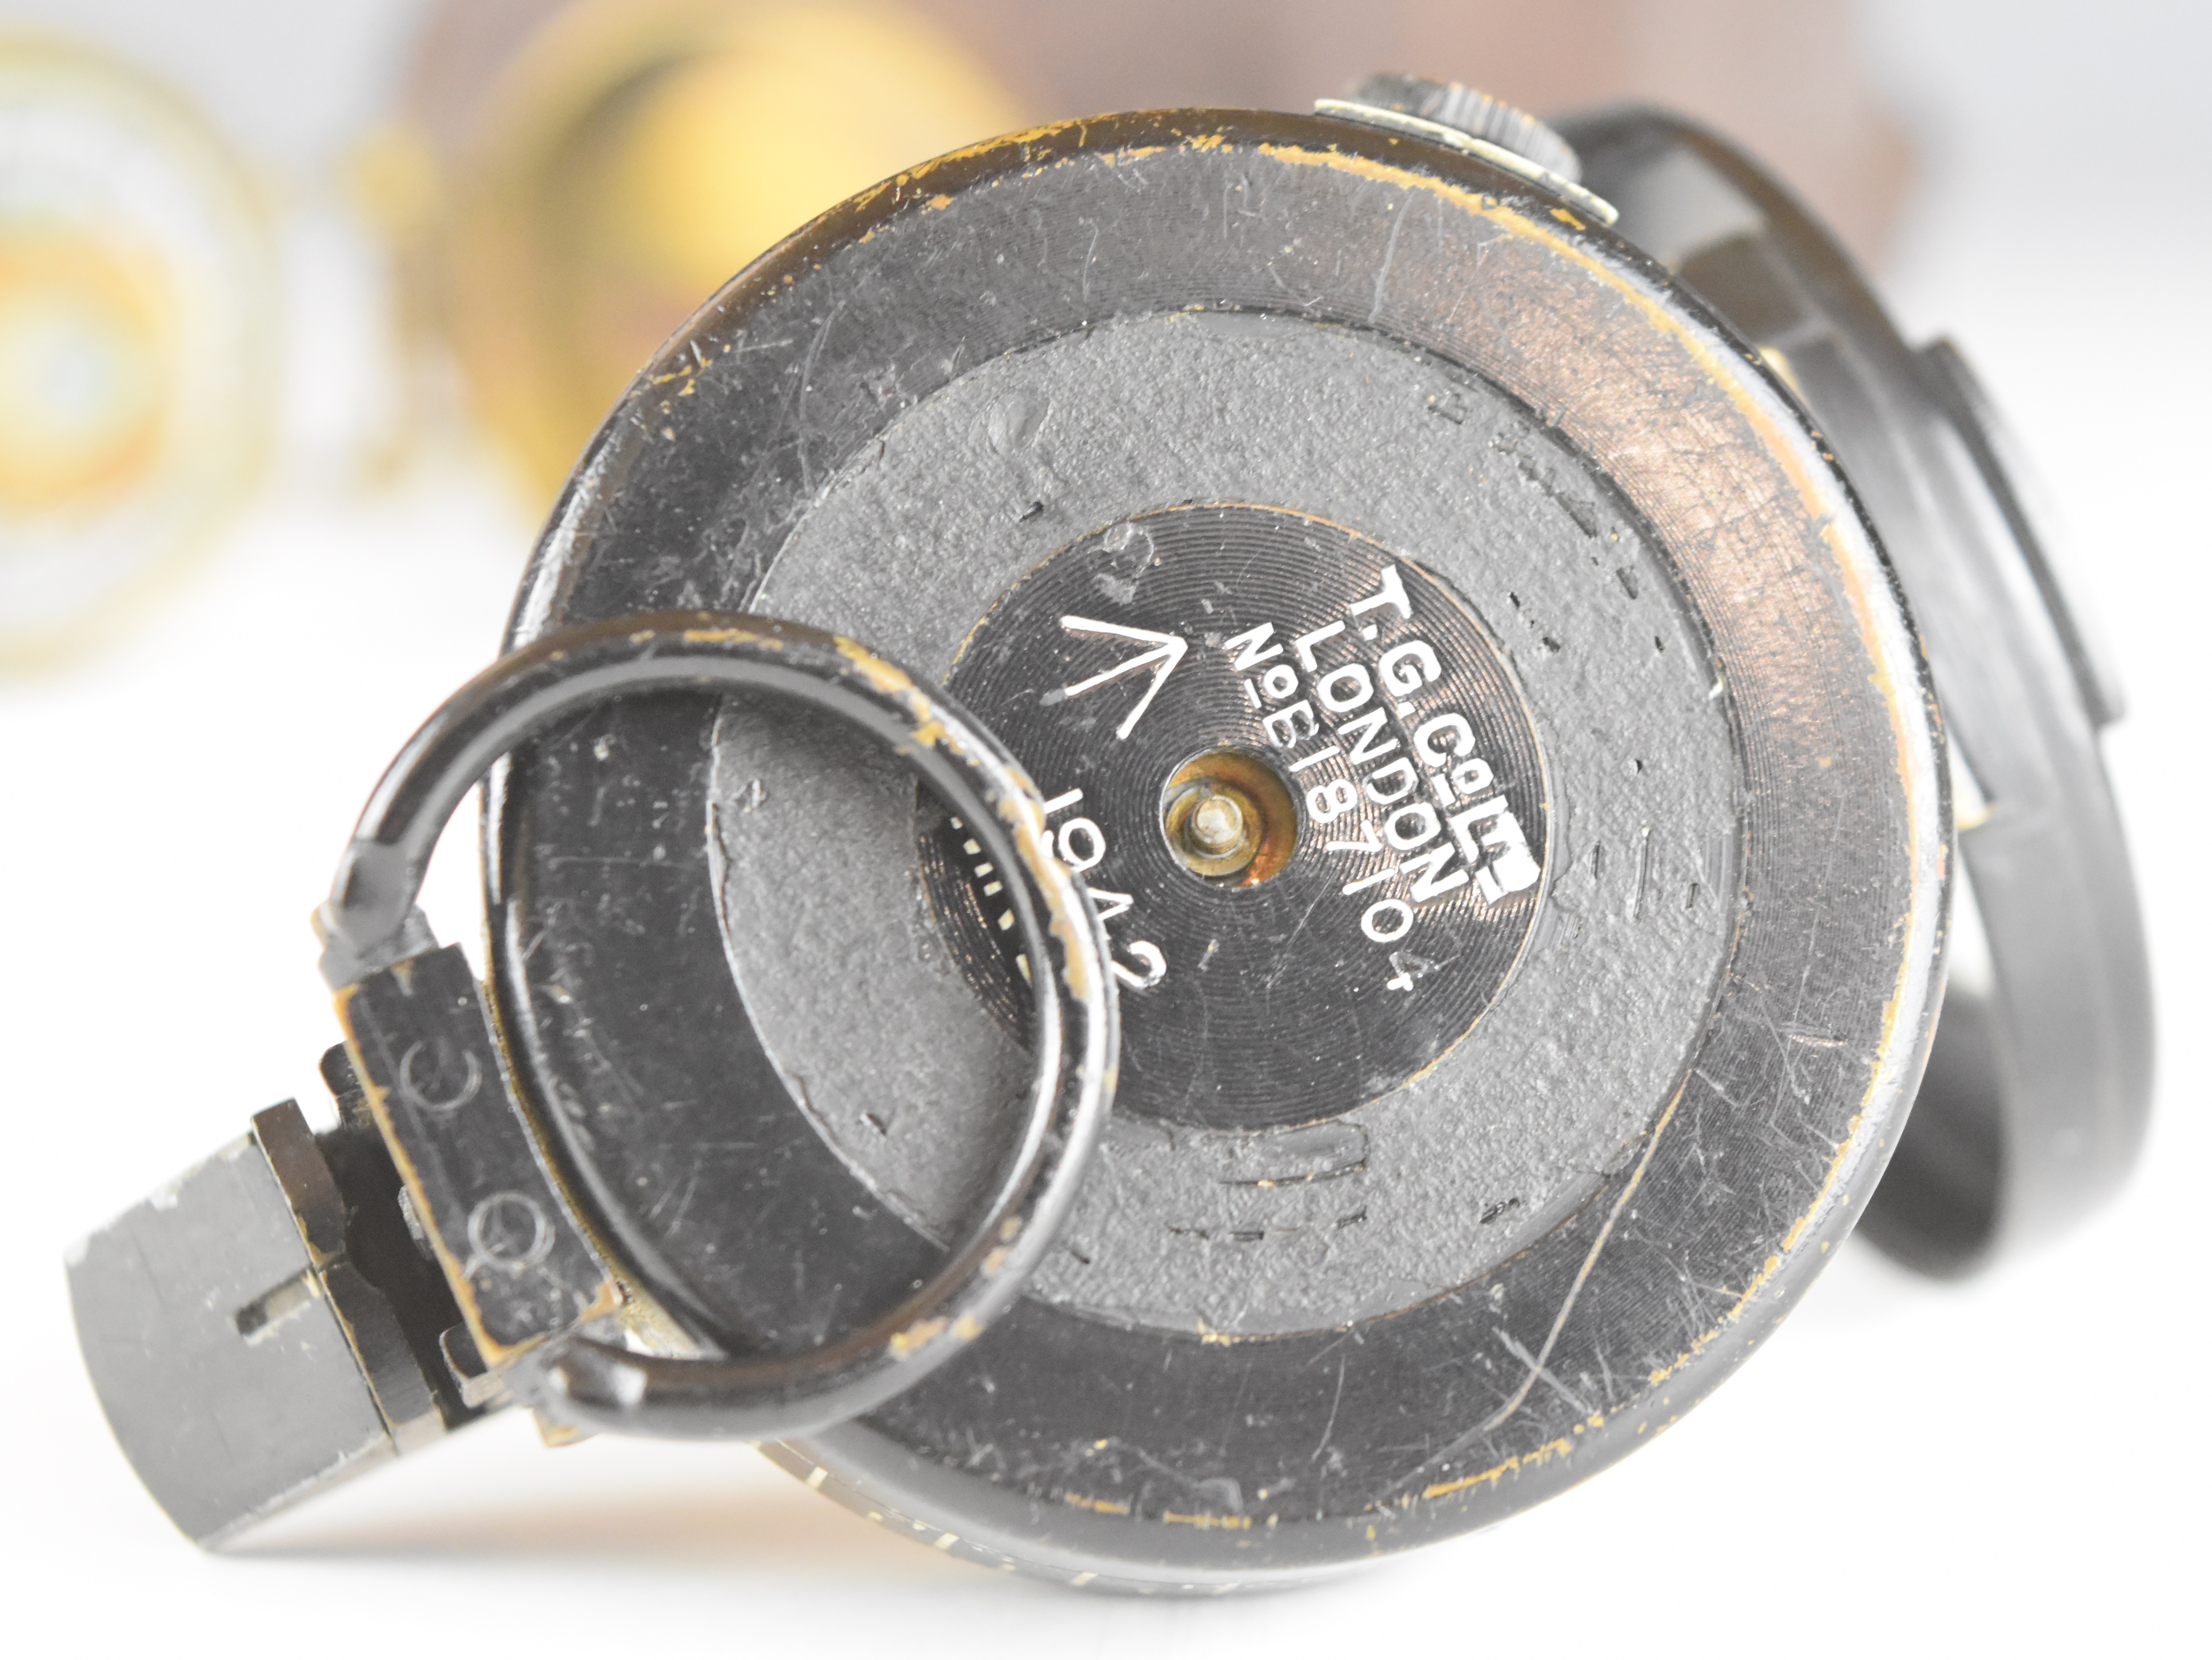 British WW2 prismatic compass by T G Co Ltd, London No B187104 1942 Mk III, with broad arrow mark, - Image 3 of 10